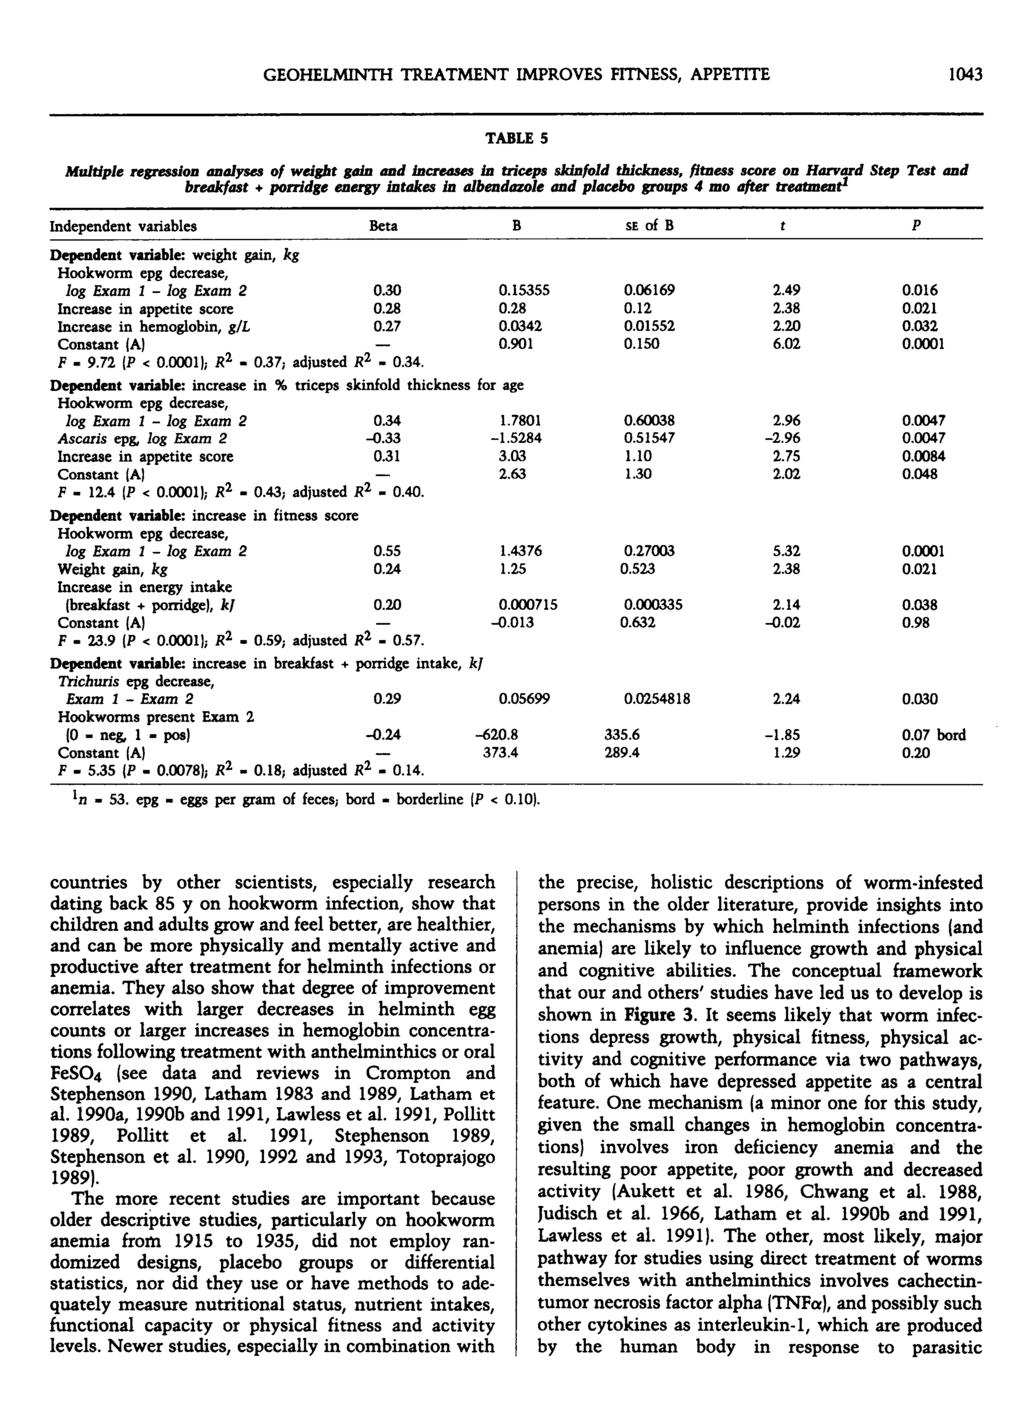 GEOHELMINTH TREATMENT IMPROVES FITNESS, APPETITE 1043 TABLE 5 Multiple regression analyses of weight gain and increases in triceps skinfold thickness, fitness score on Harvard Step Test and breakfast